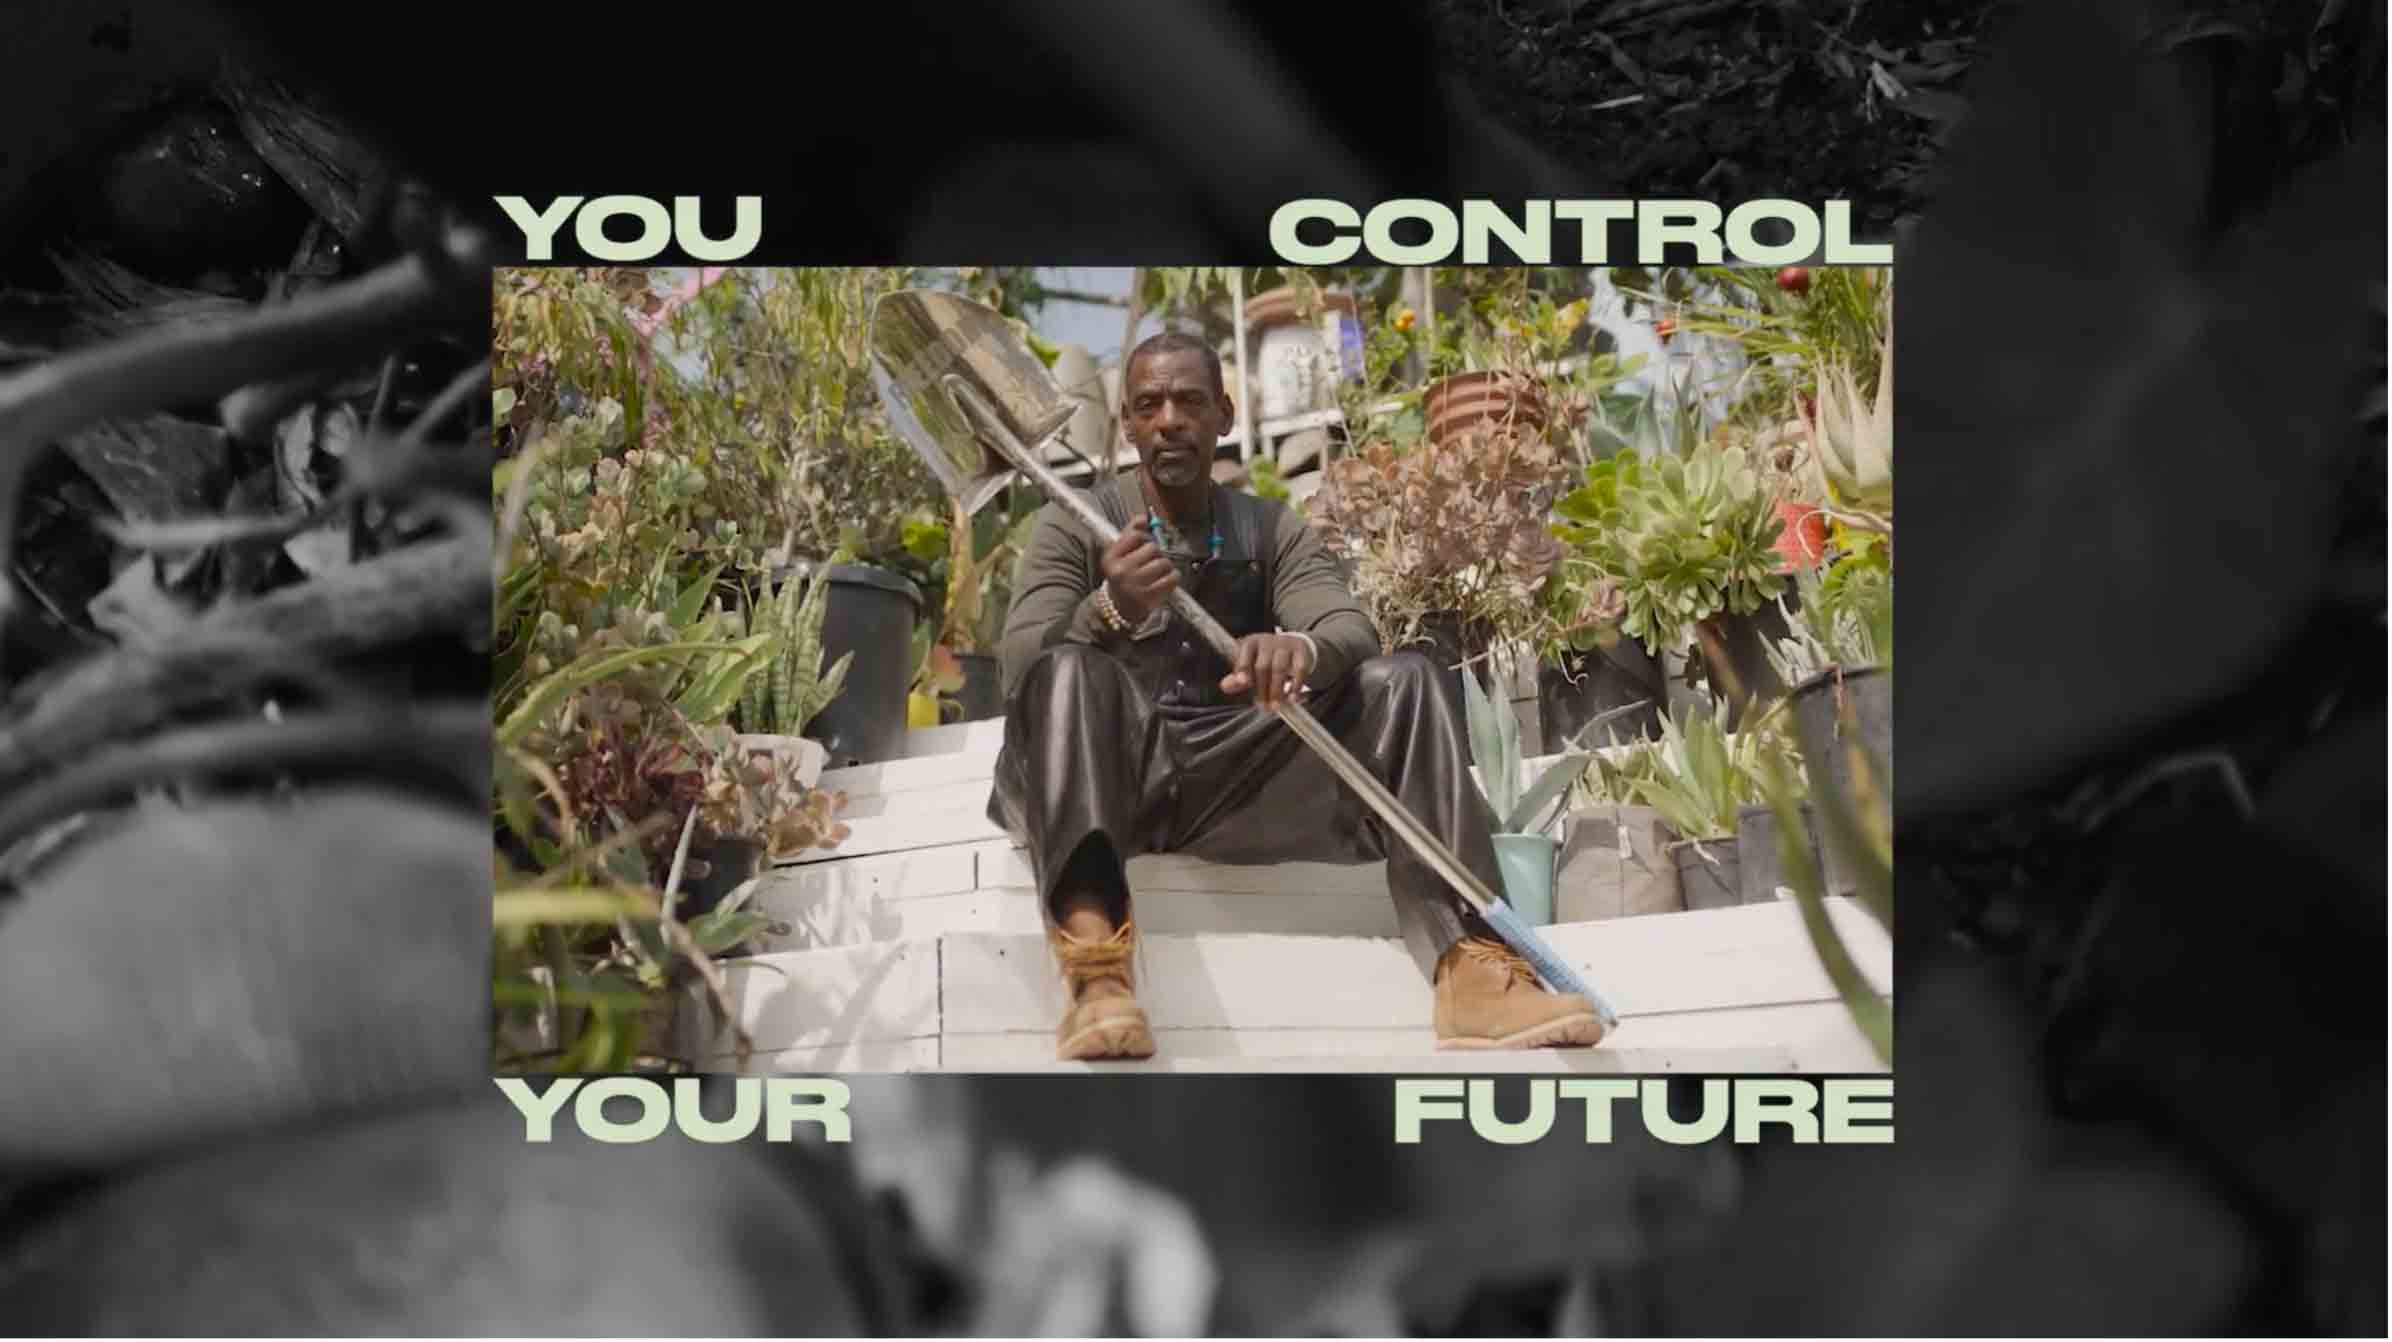 PSA video production company in Los Angeles - you control your future